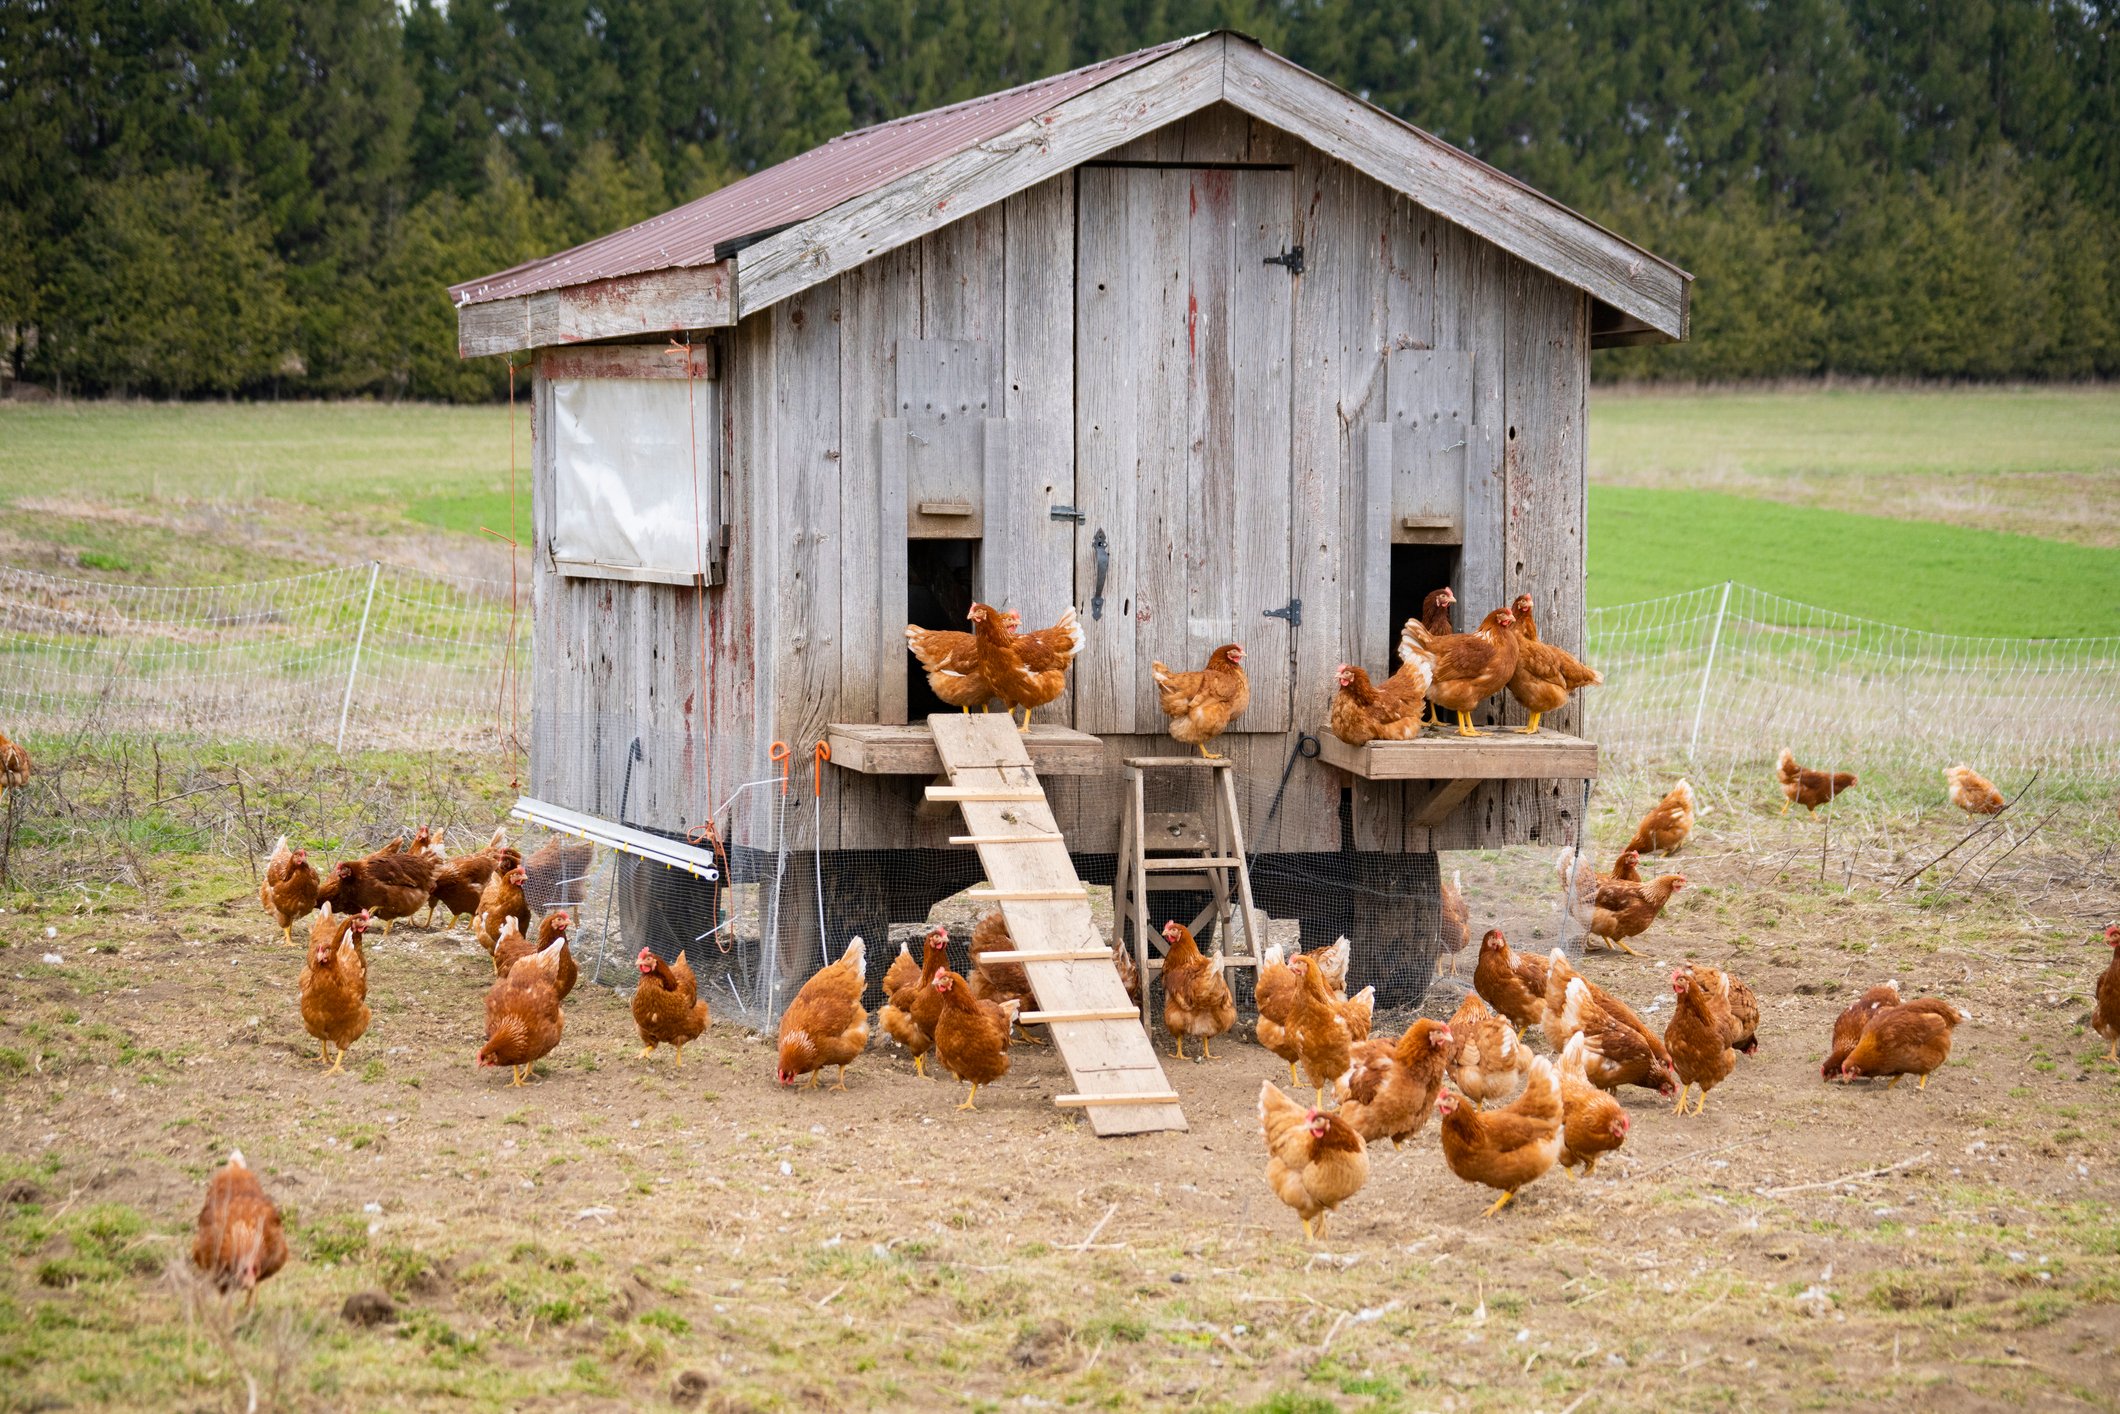 Several chickens standing near a wooden house